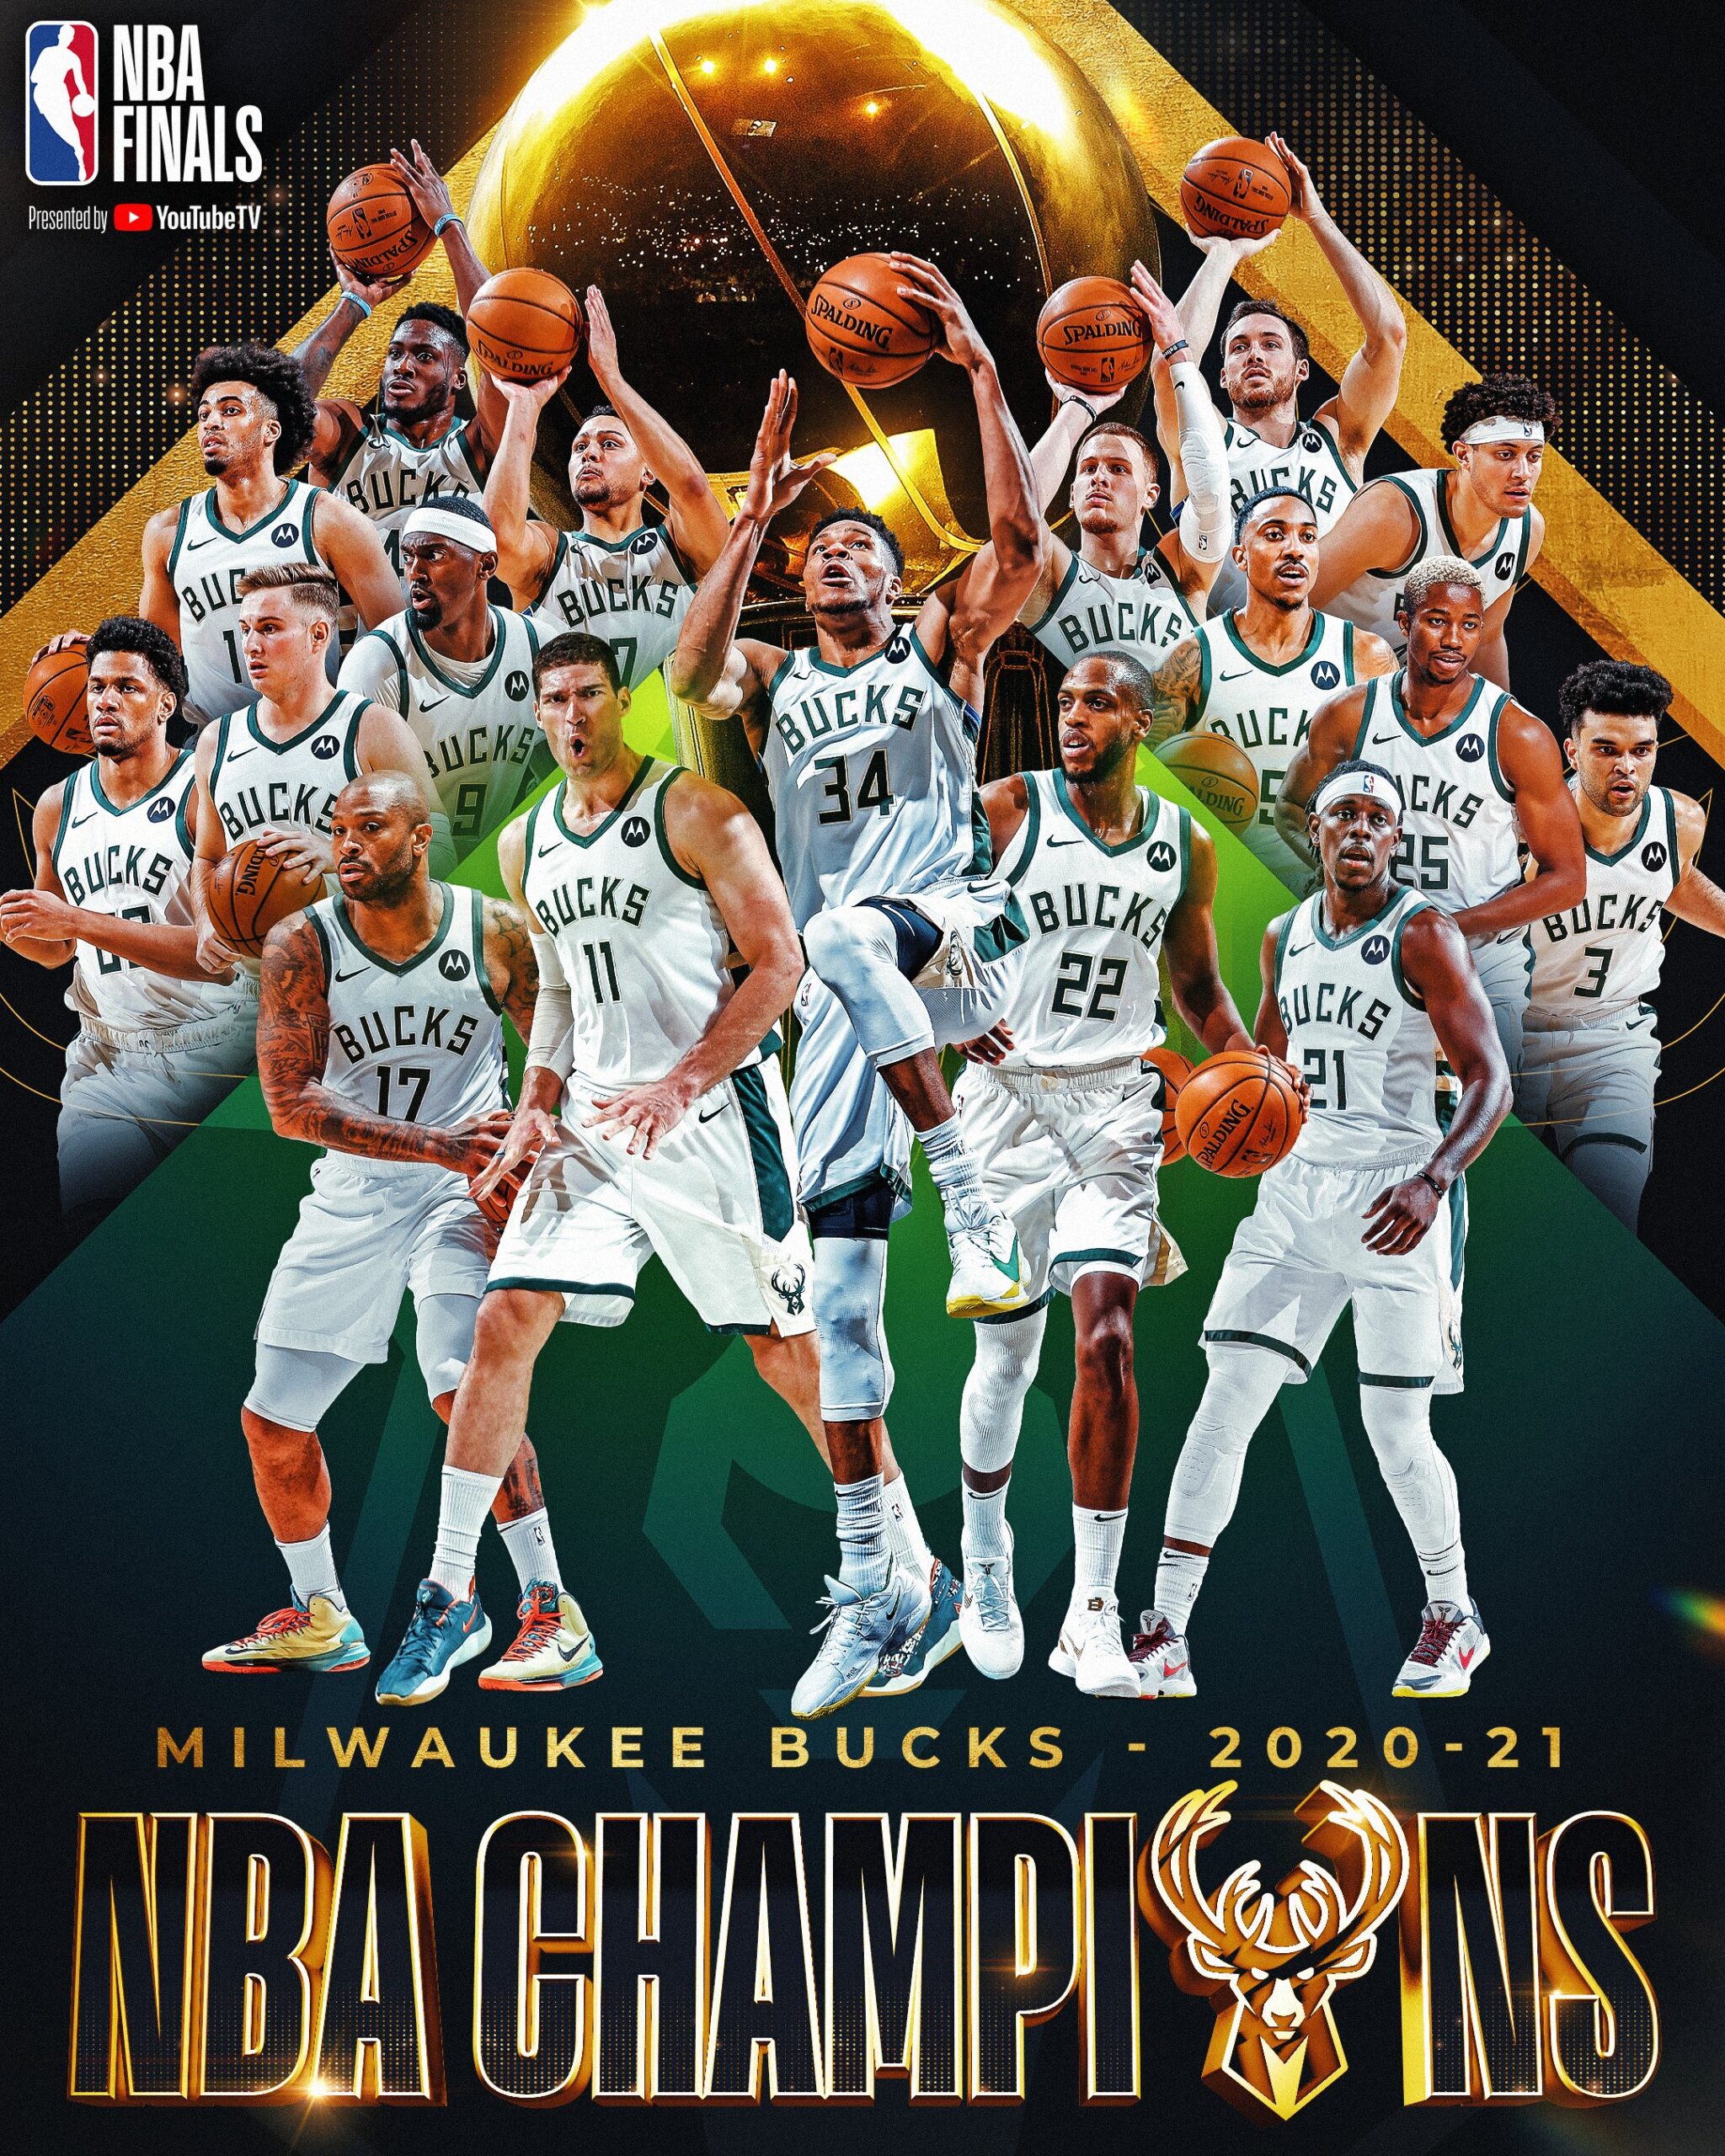 Bucks wins 2021 Championship after defeating Suns 105-98 in Game 6